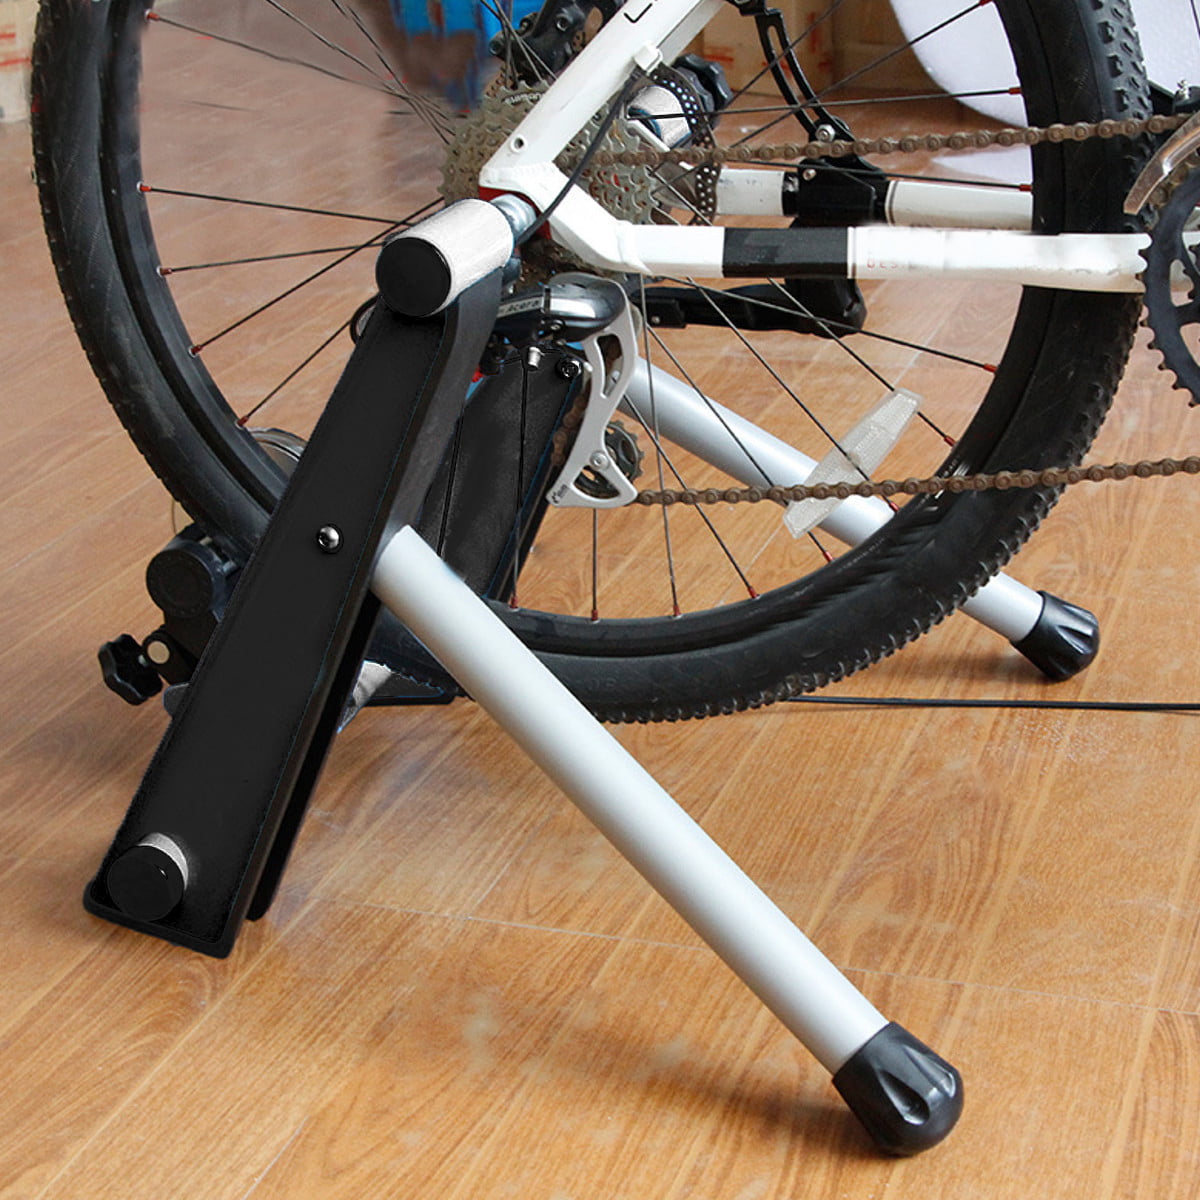 Foldable Magnetic Turbo Trainer Bike Trainer Stand for Mountain Bicycle Indoor 